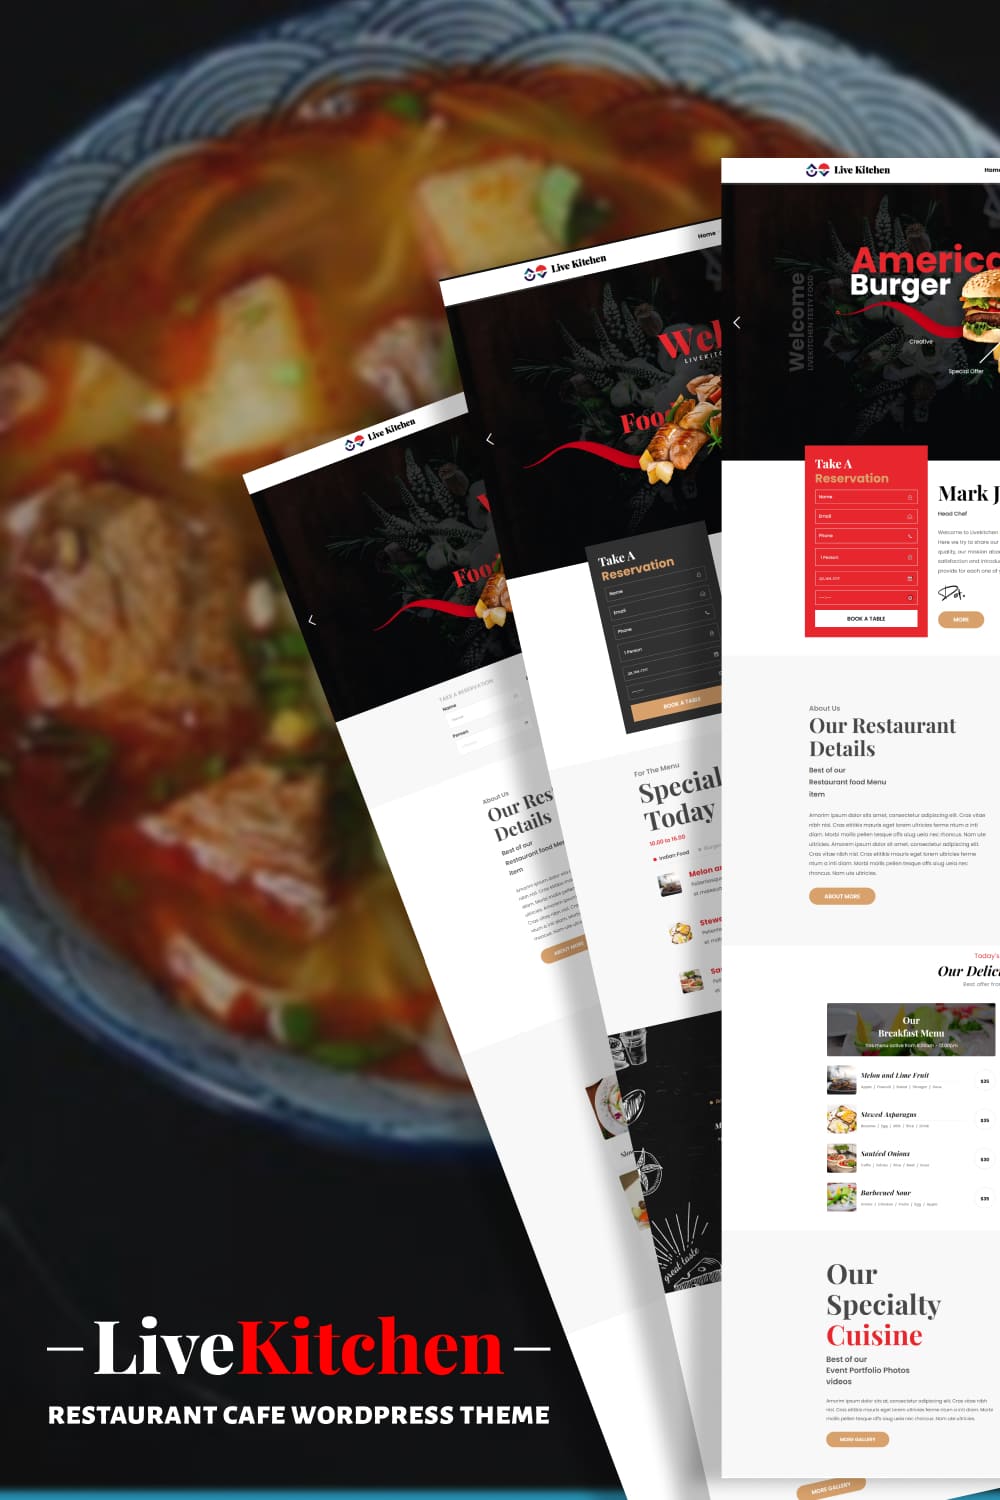 Special dishes of the Livekitchen | Restaurant Cafe WordPress Theme.